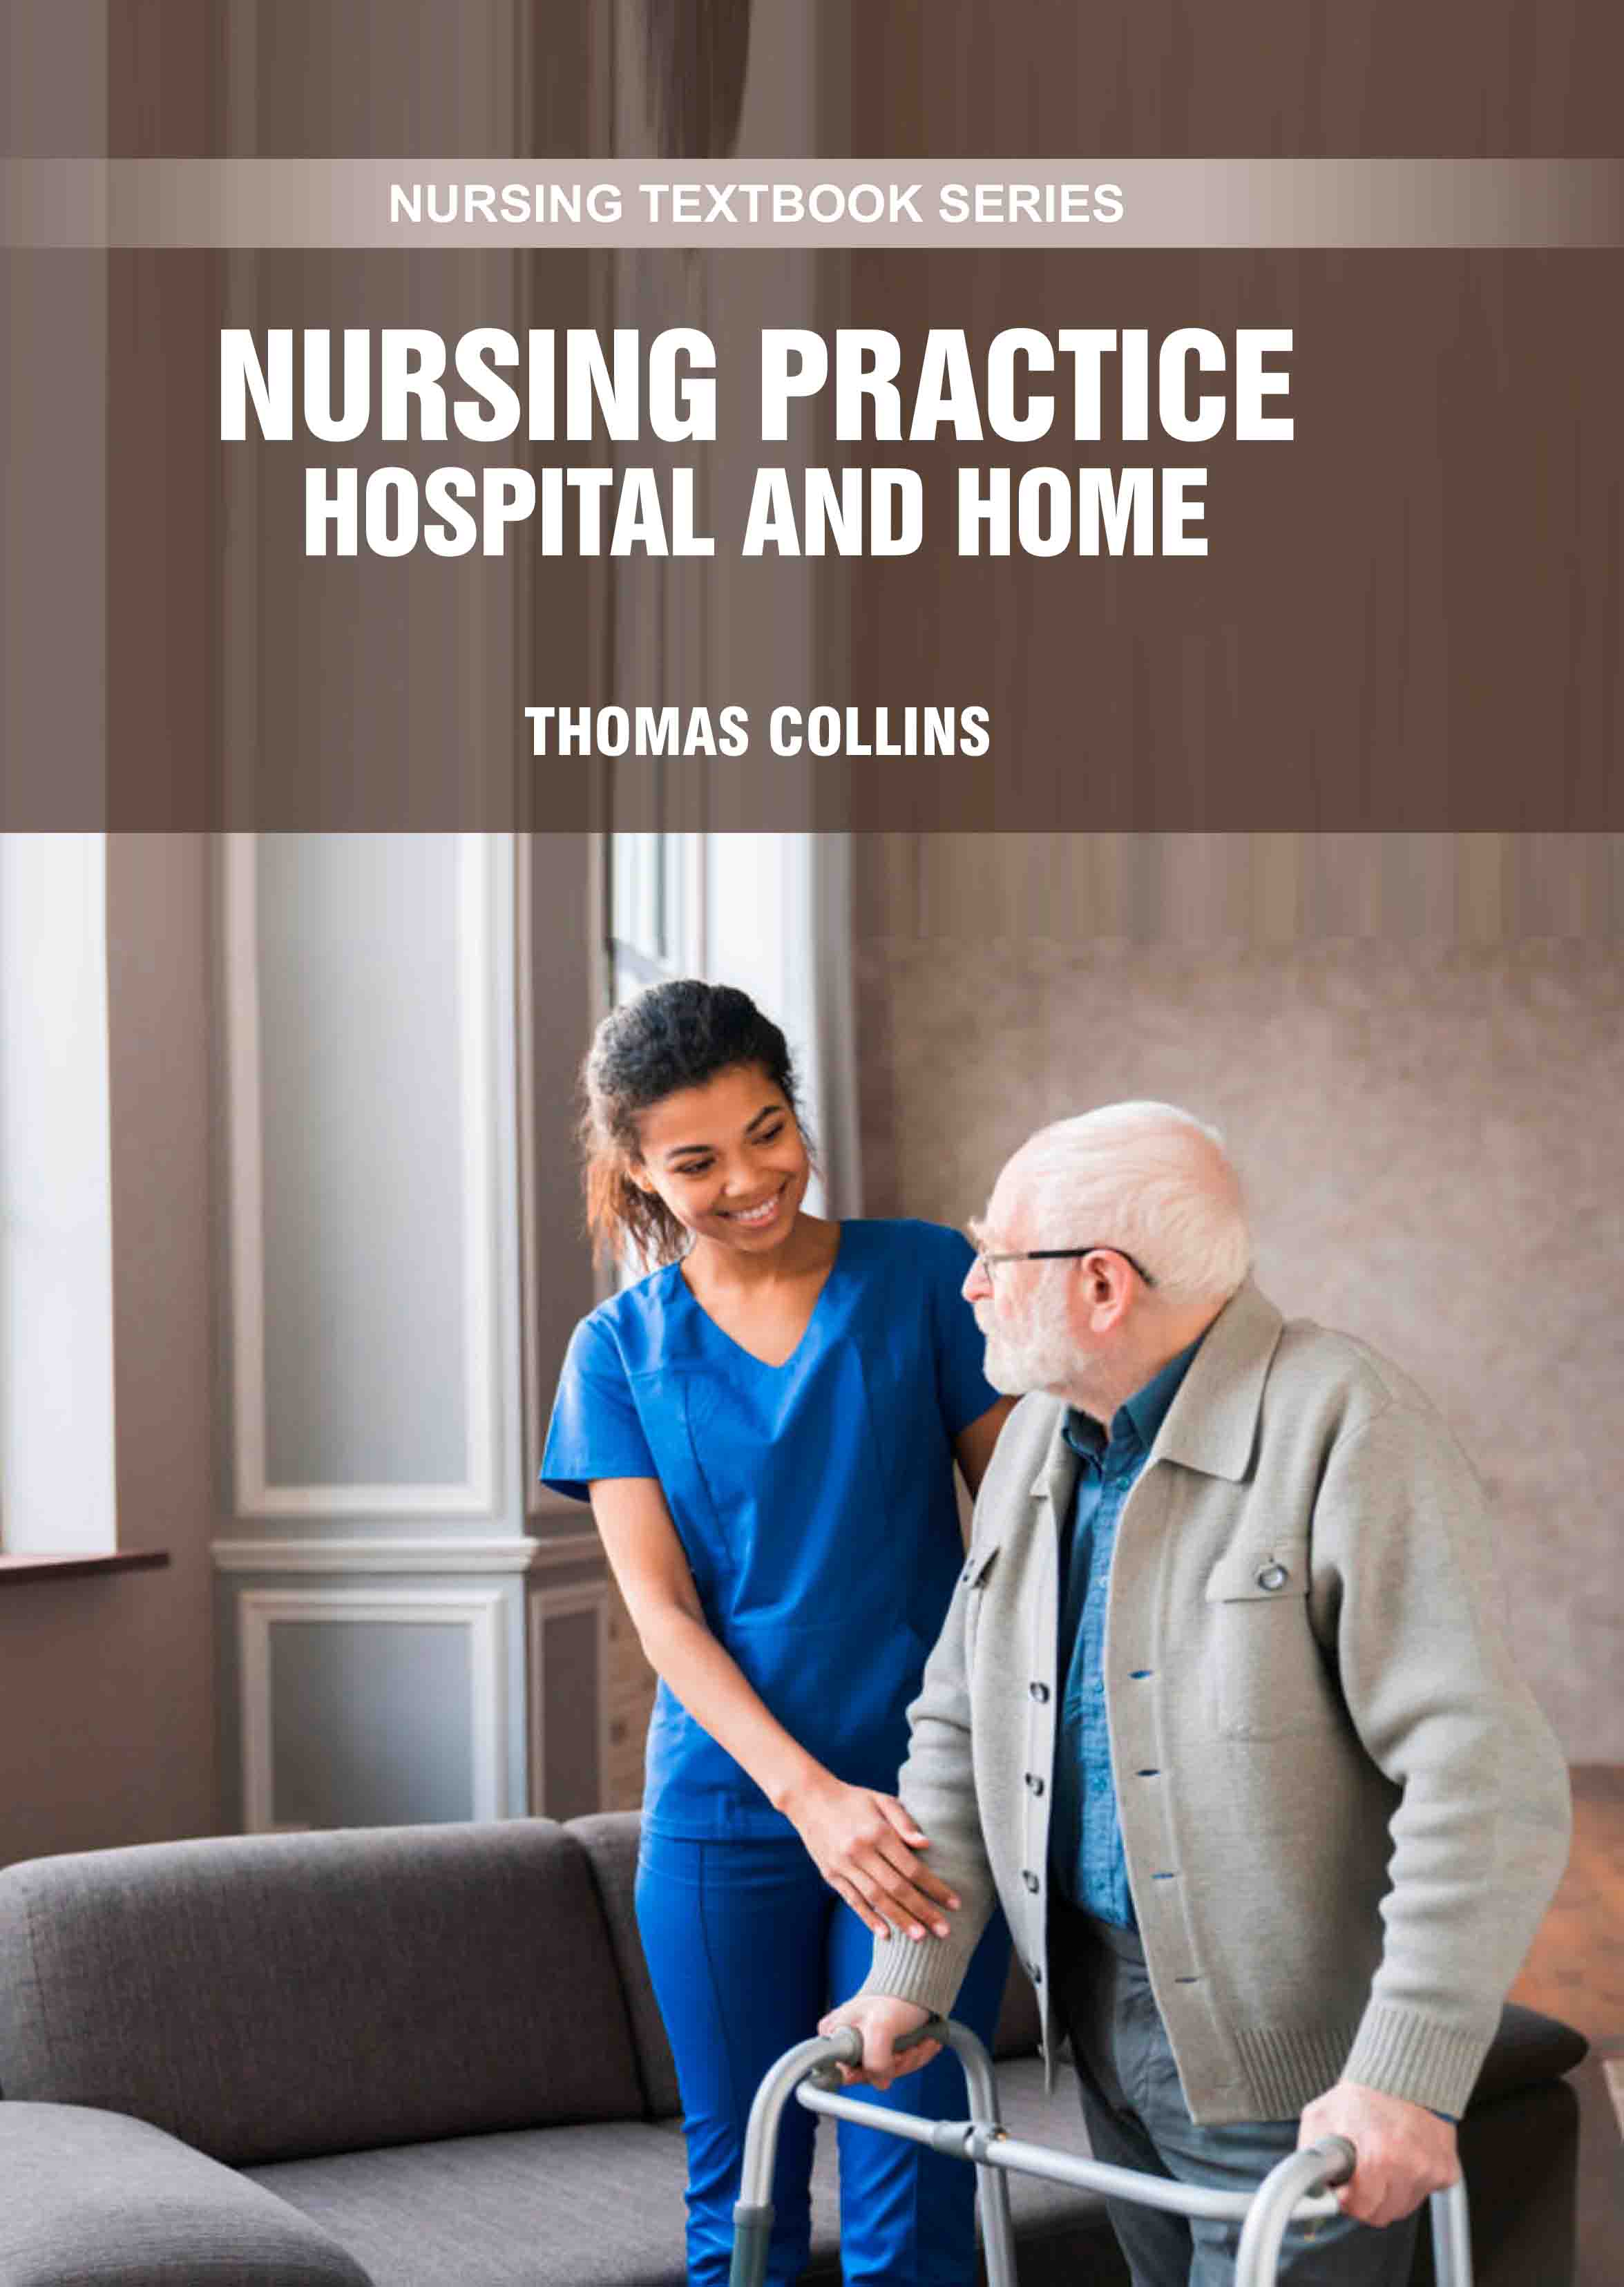 Nursing Practice: Hospital and Home